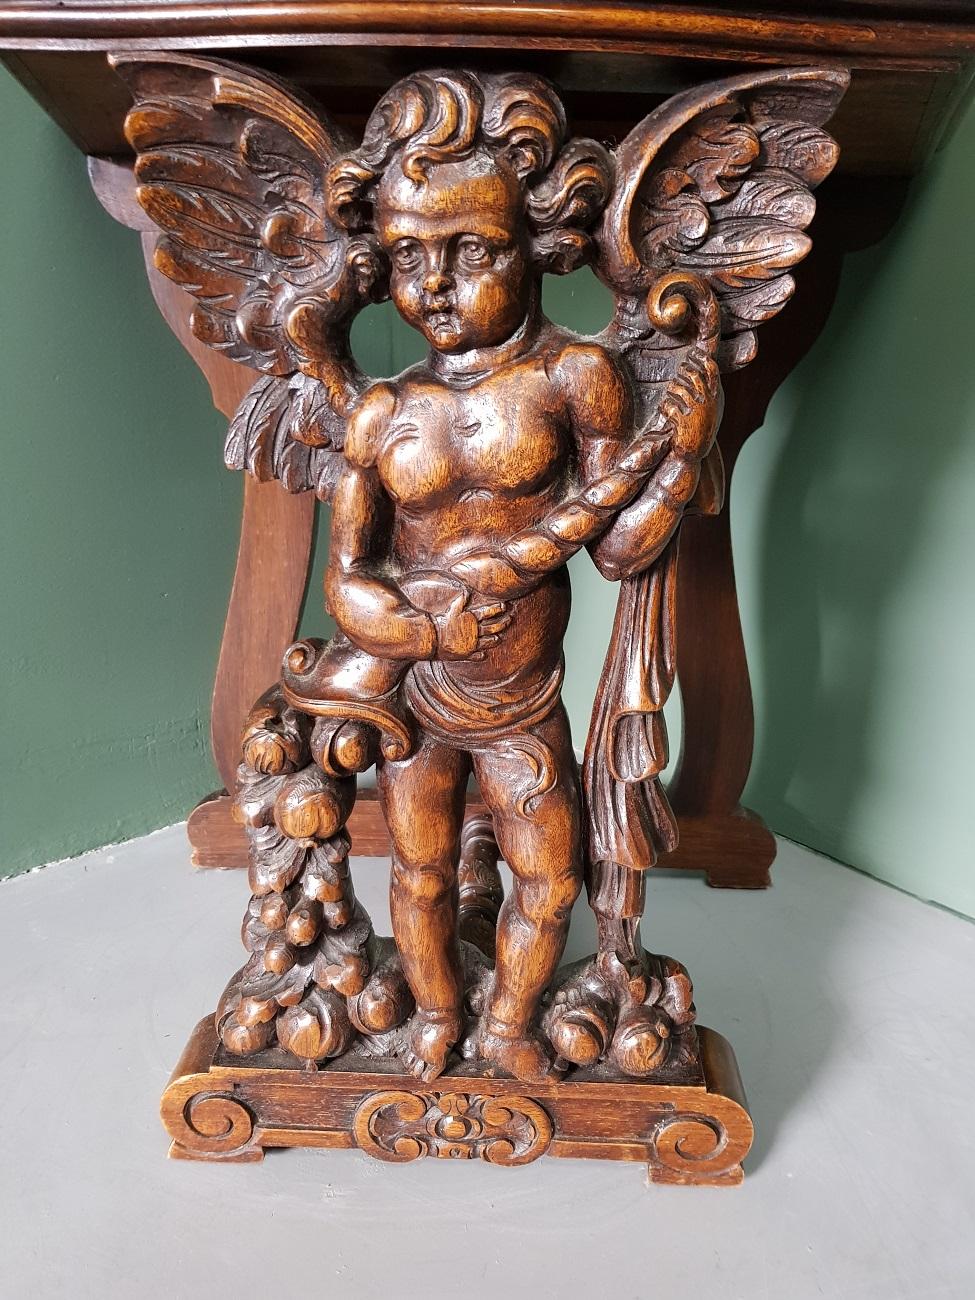 Antique style Italian Renaissance Revival hall table with a carved angel on the front surrounded by flowers, garland, etc. (the blade has slight traces of users), from the First half of the 20th century.

The measurements are,
Depth 36 cm/ 14.1